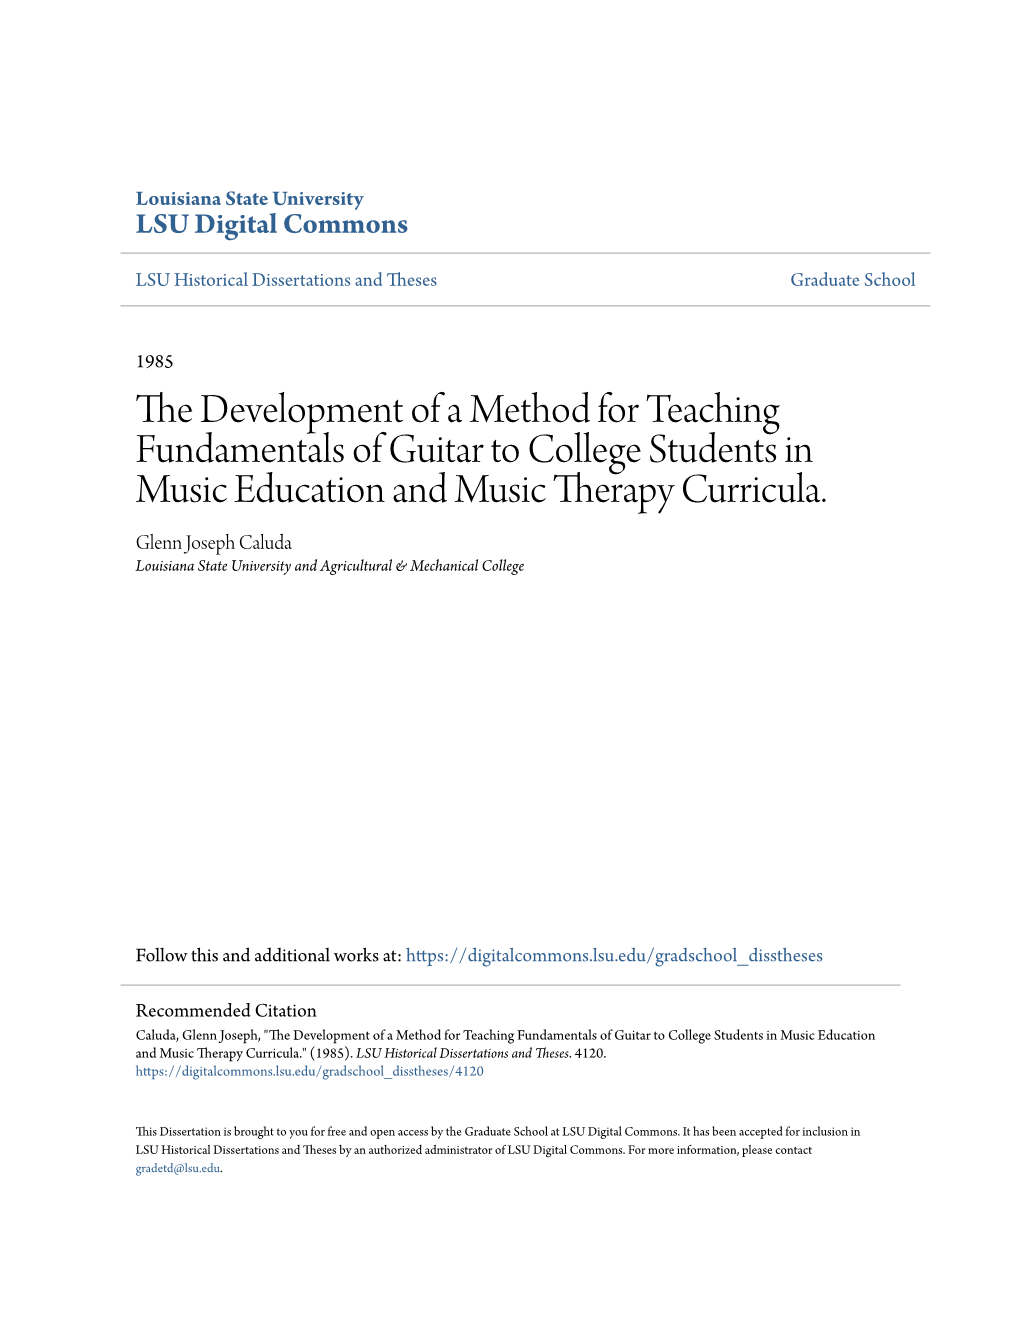 The Development of a Method for Teaching Fundamentals of Guitar to College Students in Music Education and Music Therapy Curricula